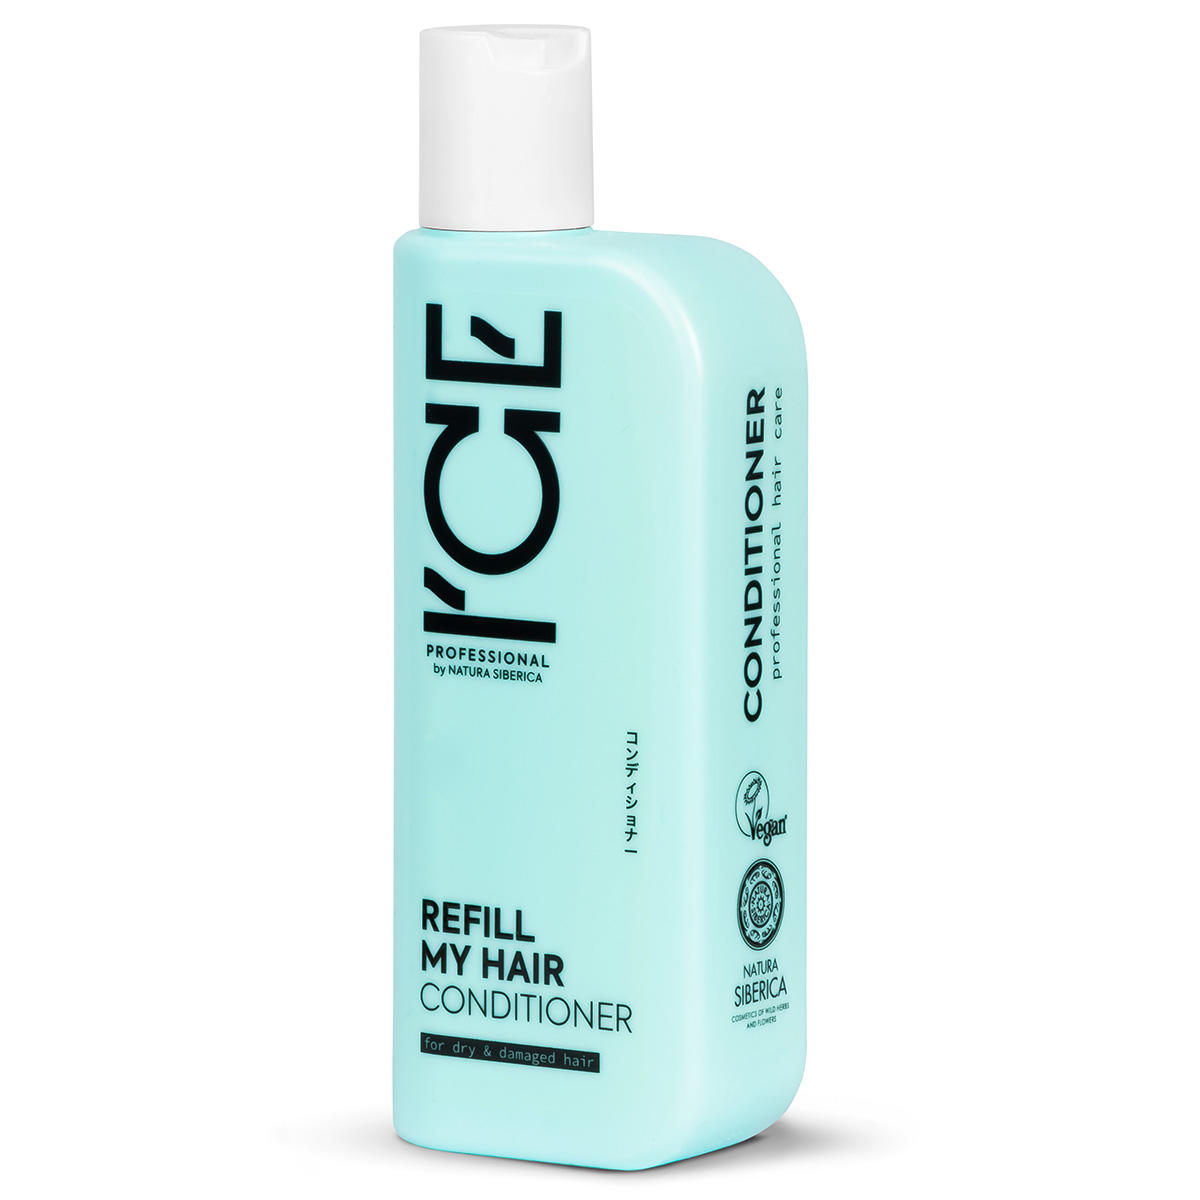 ICE Professional Refill My Hair Conditioner 250 ml - 1